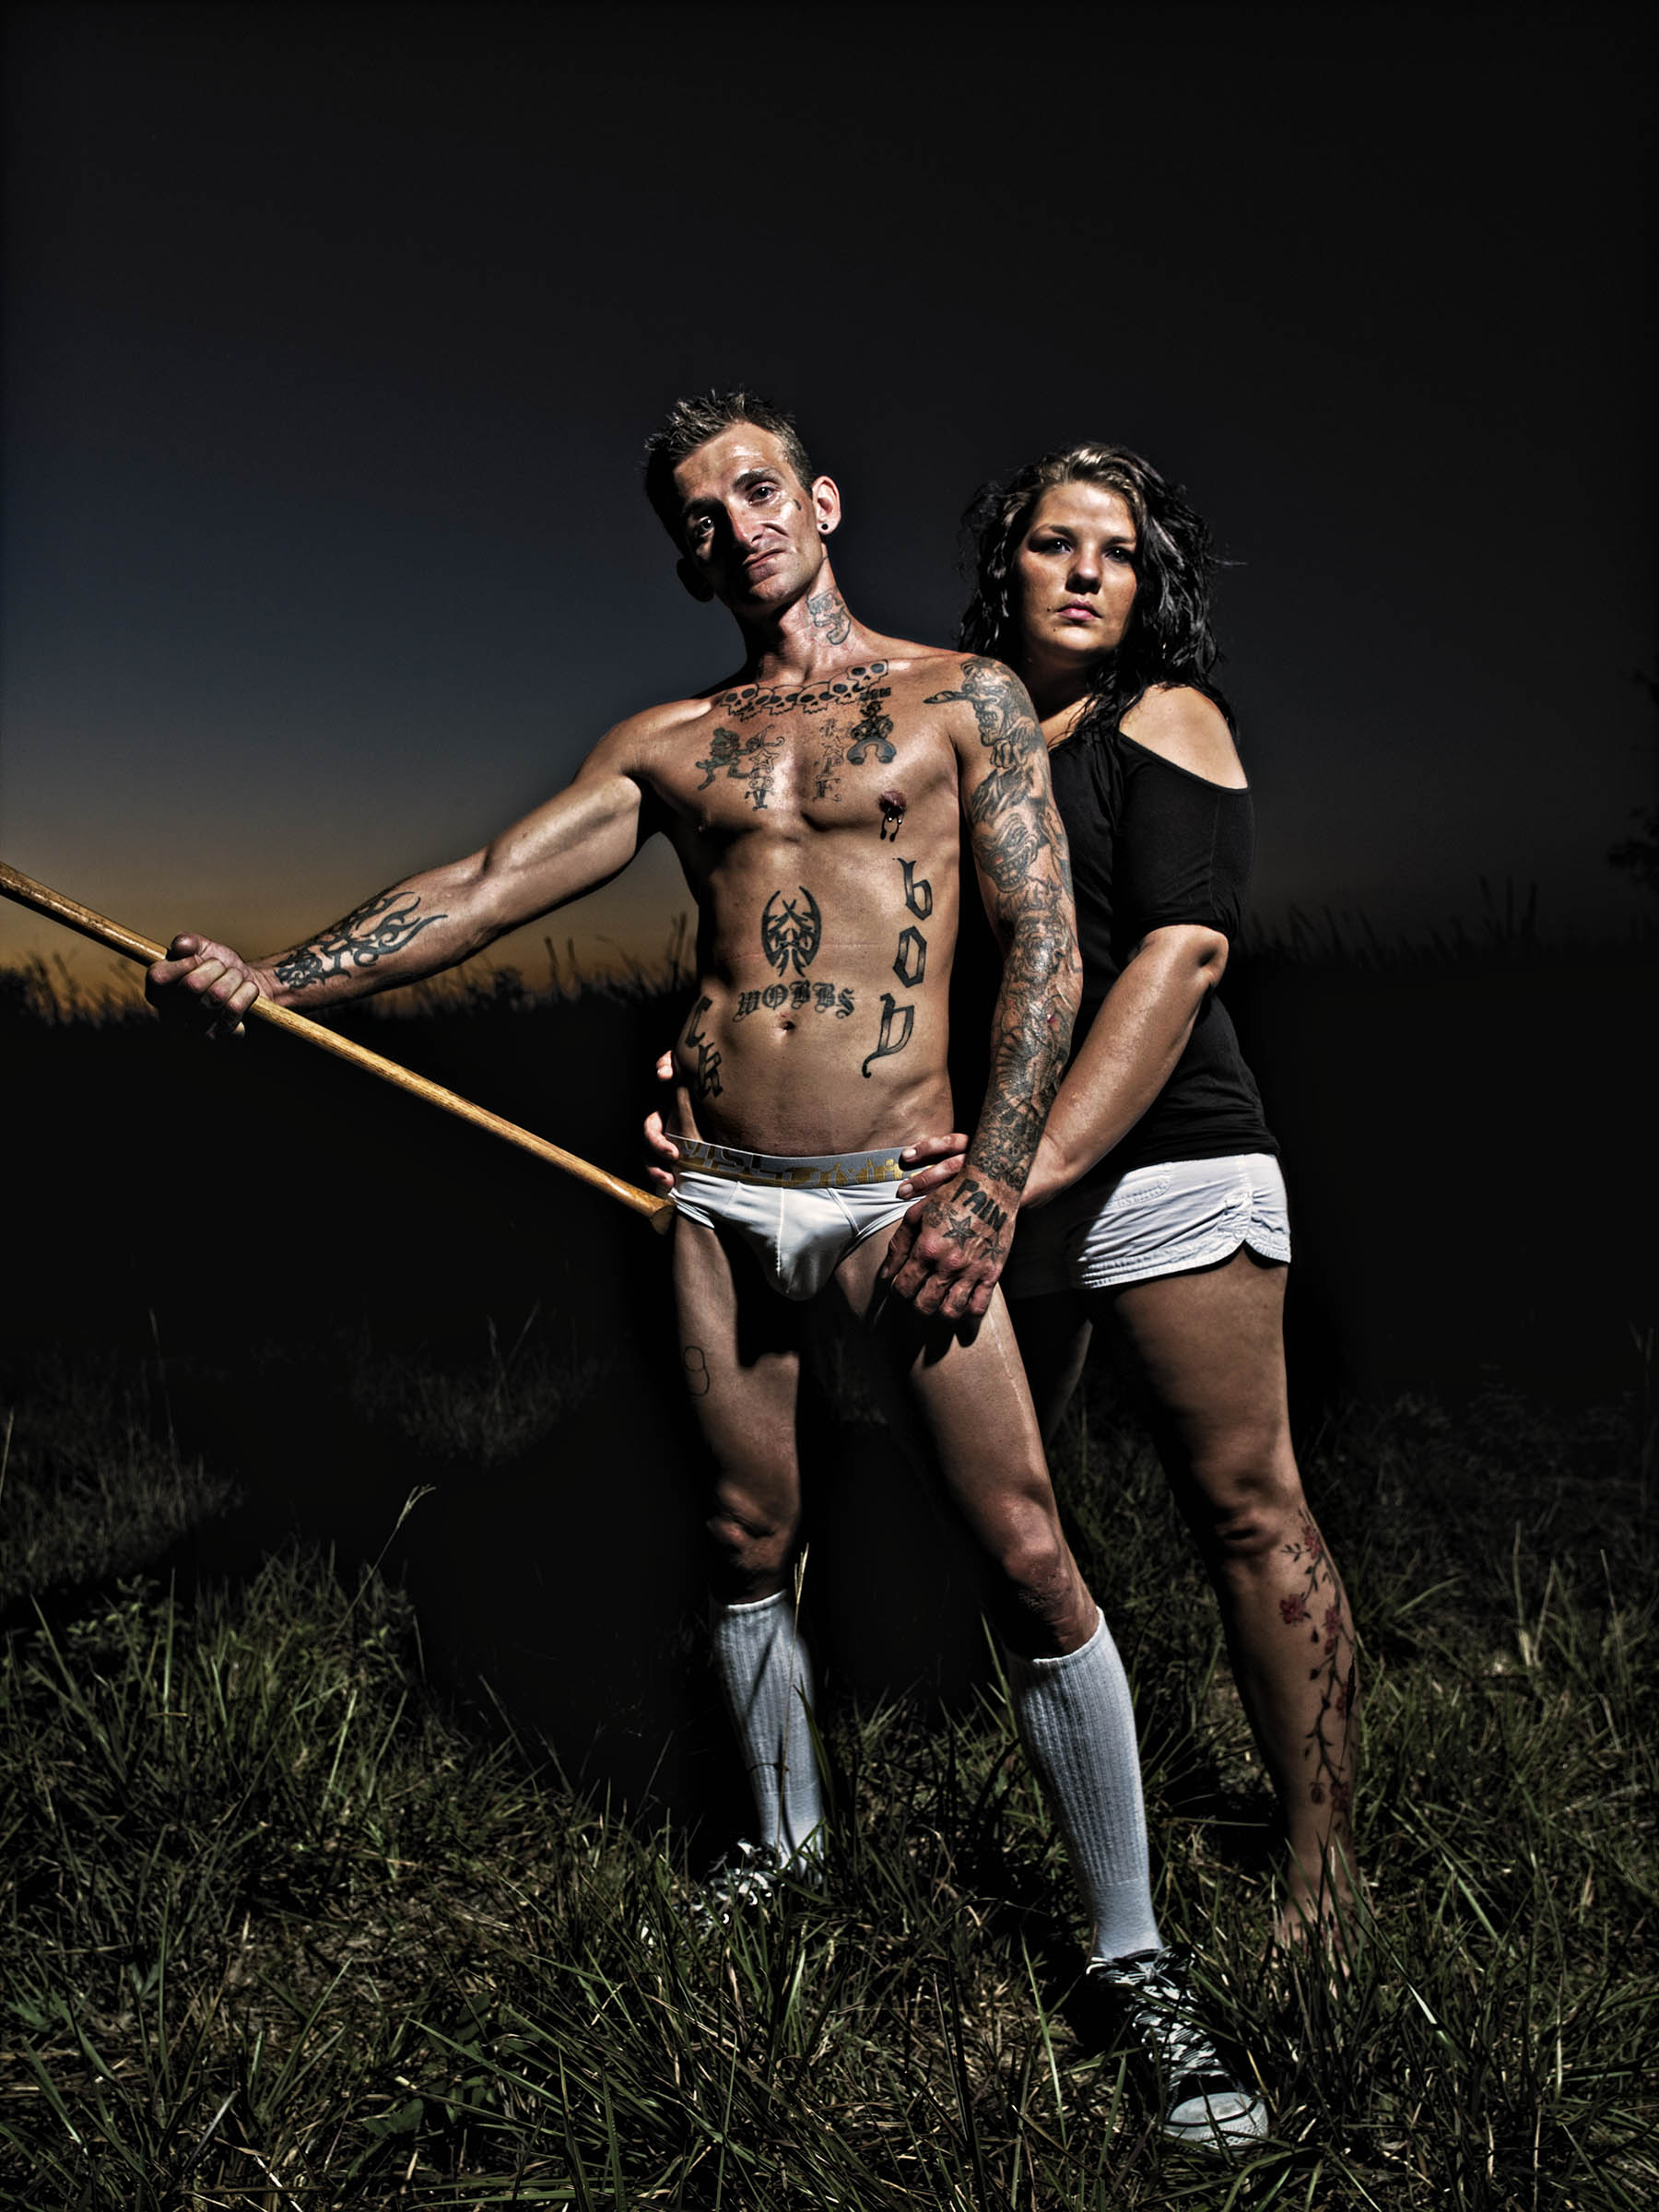 Lifestyle Portrait of Billy Ianne, Tattoo artist, Kimber, aka The Axe Twins, Keepers of the EverGlades, Conceptual Portrait Photography by the best editorial location Professional Advertising Portrait Photographer in NYC and LA,  Berlin, Munich, Paris, London Wick Beavers Portraiture Photography